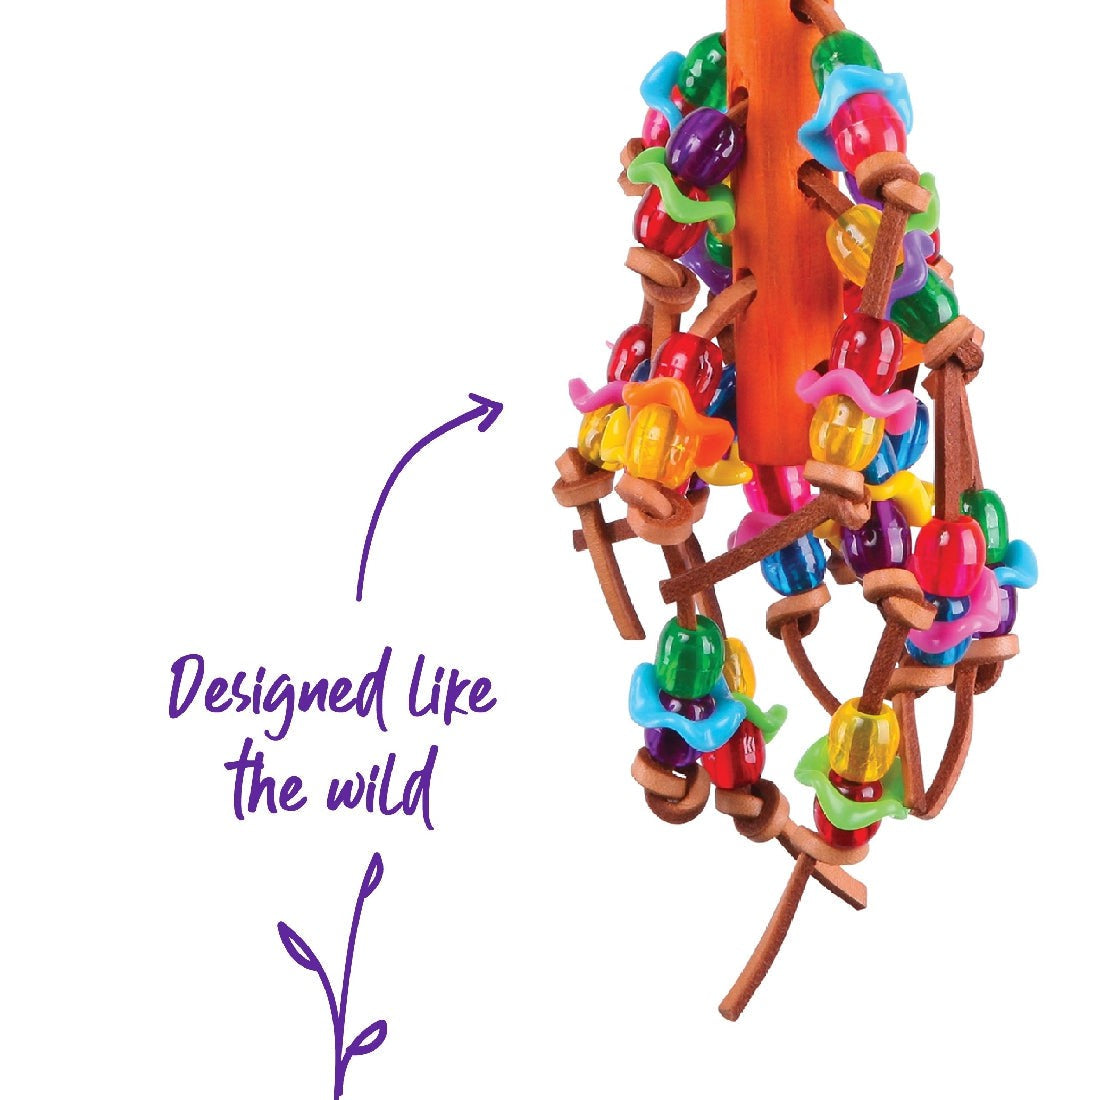 Colorful bird toy with plastic beads and brown ropes, "Designed Like the wild".